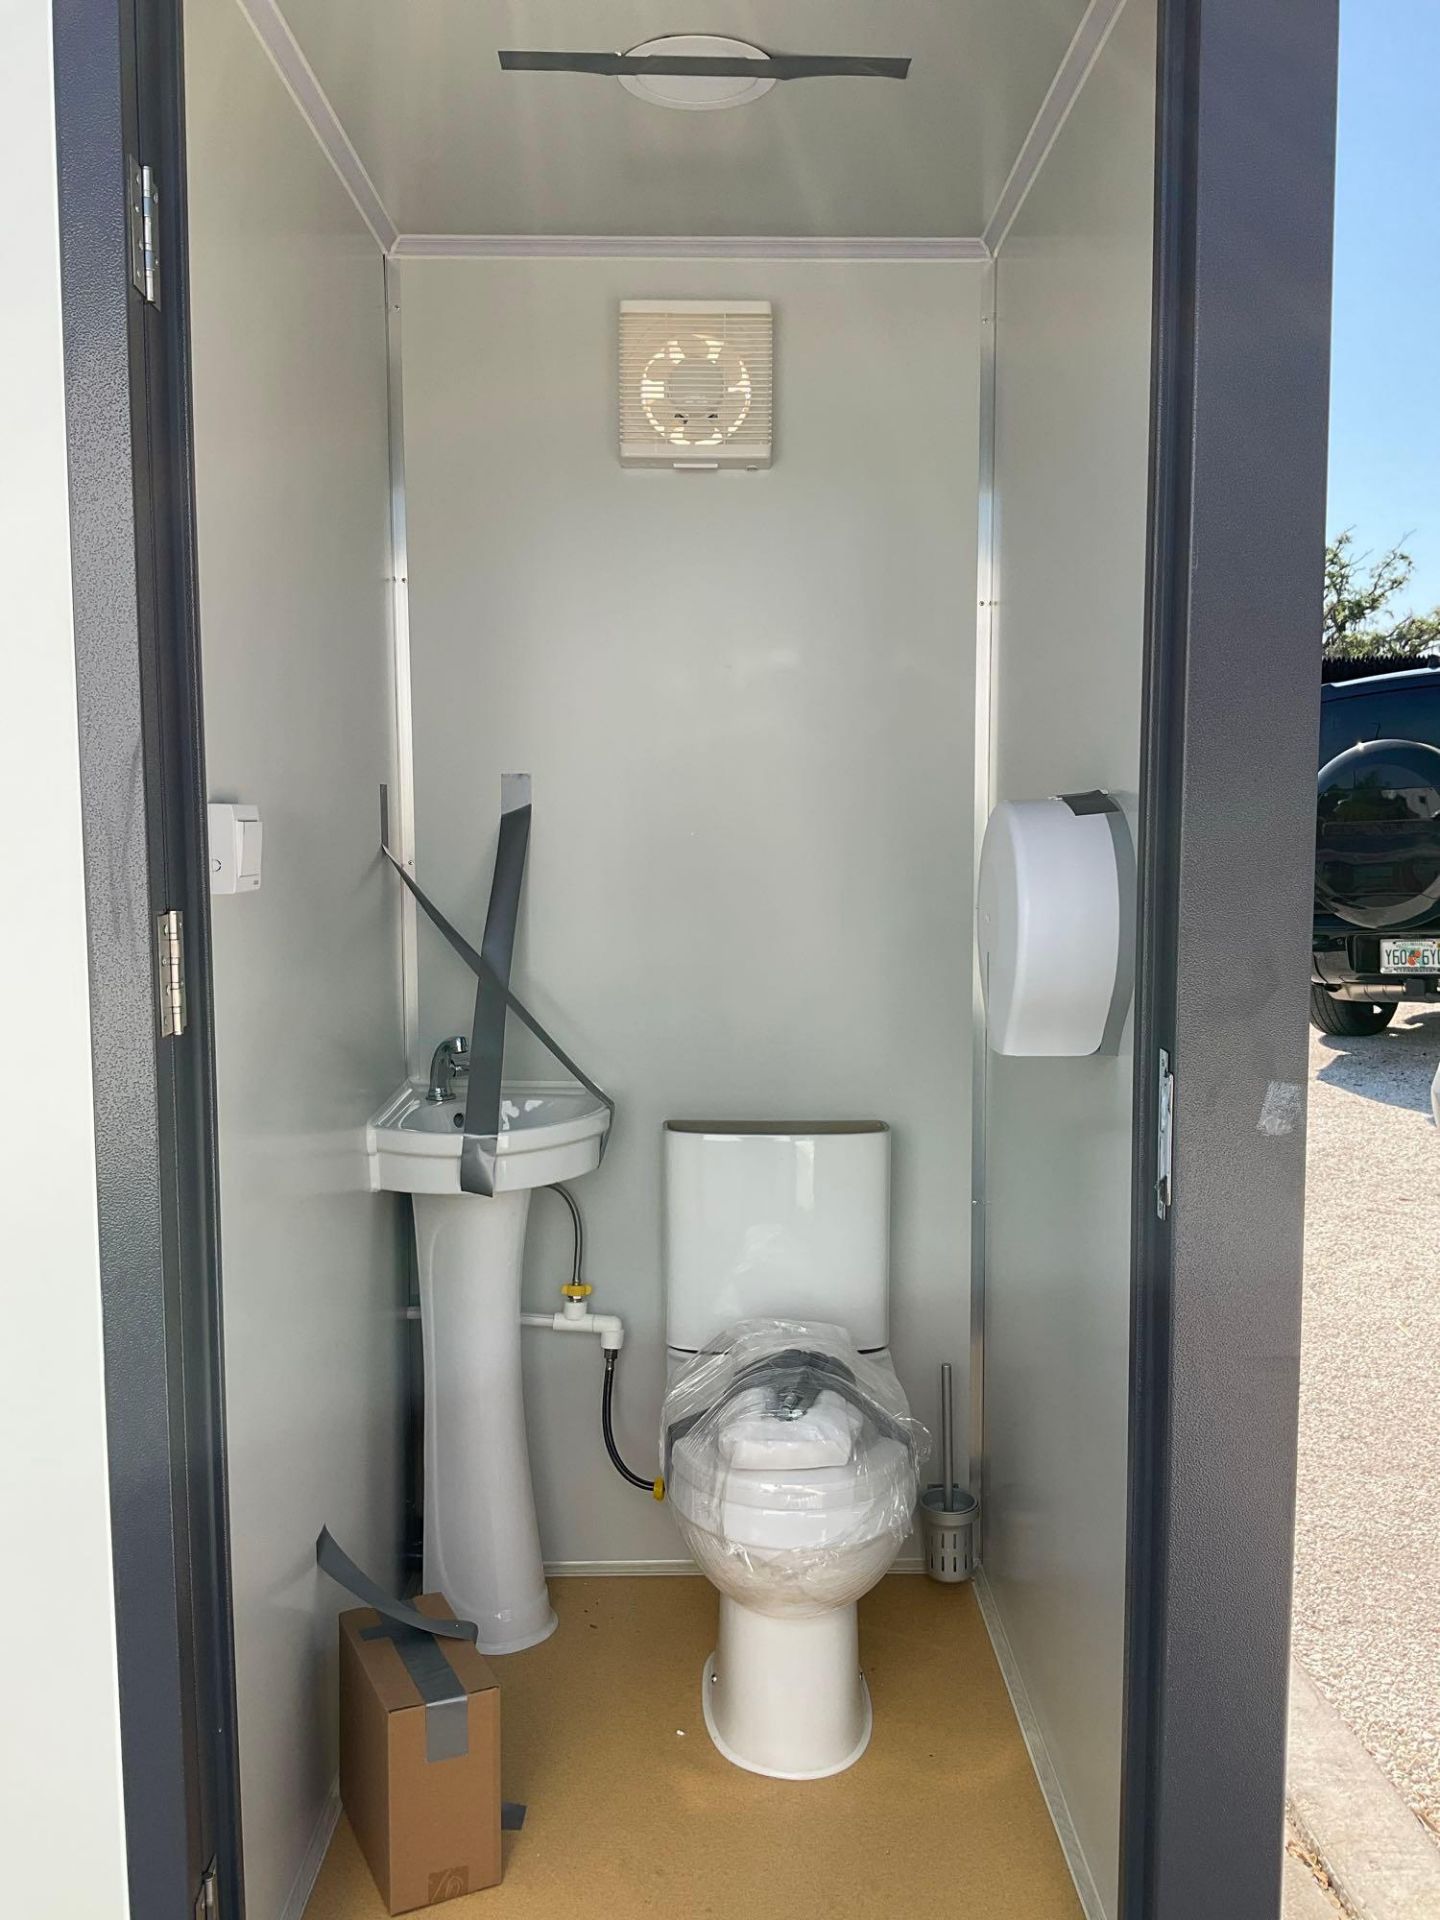 UNUSED PORTABLE DOUBLE BATHROOM UNIT, 2 STALLS, ELECTRIC & PLUMBING HOOK UP WITH EXTERIOR PLUMBIN... - Image 9 of 11